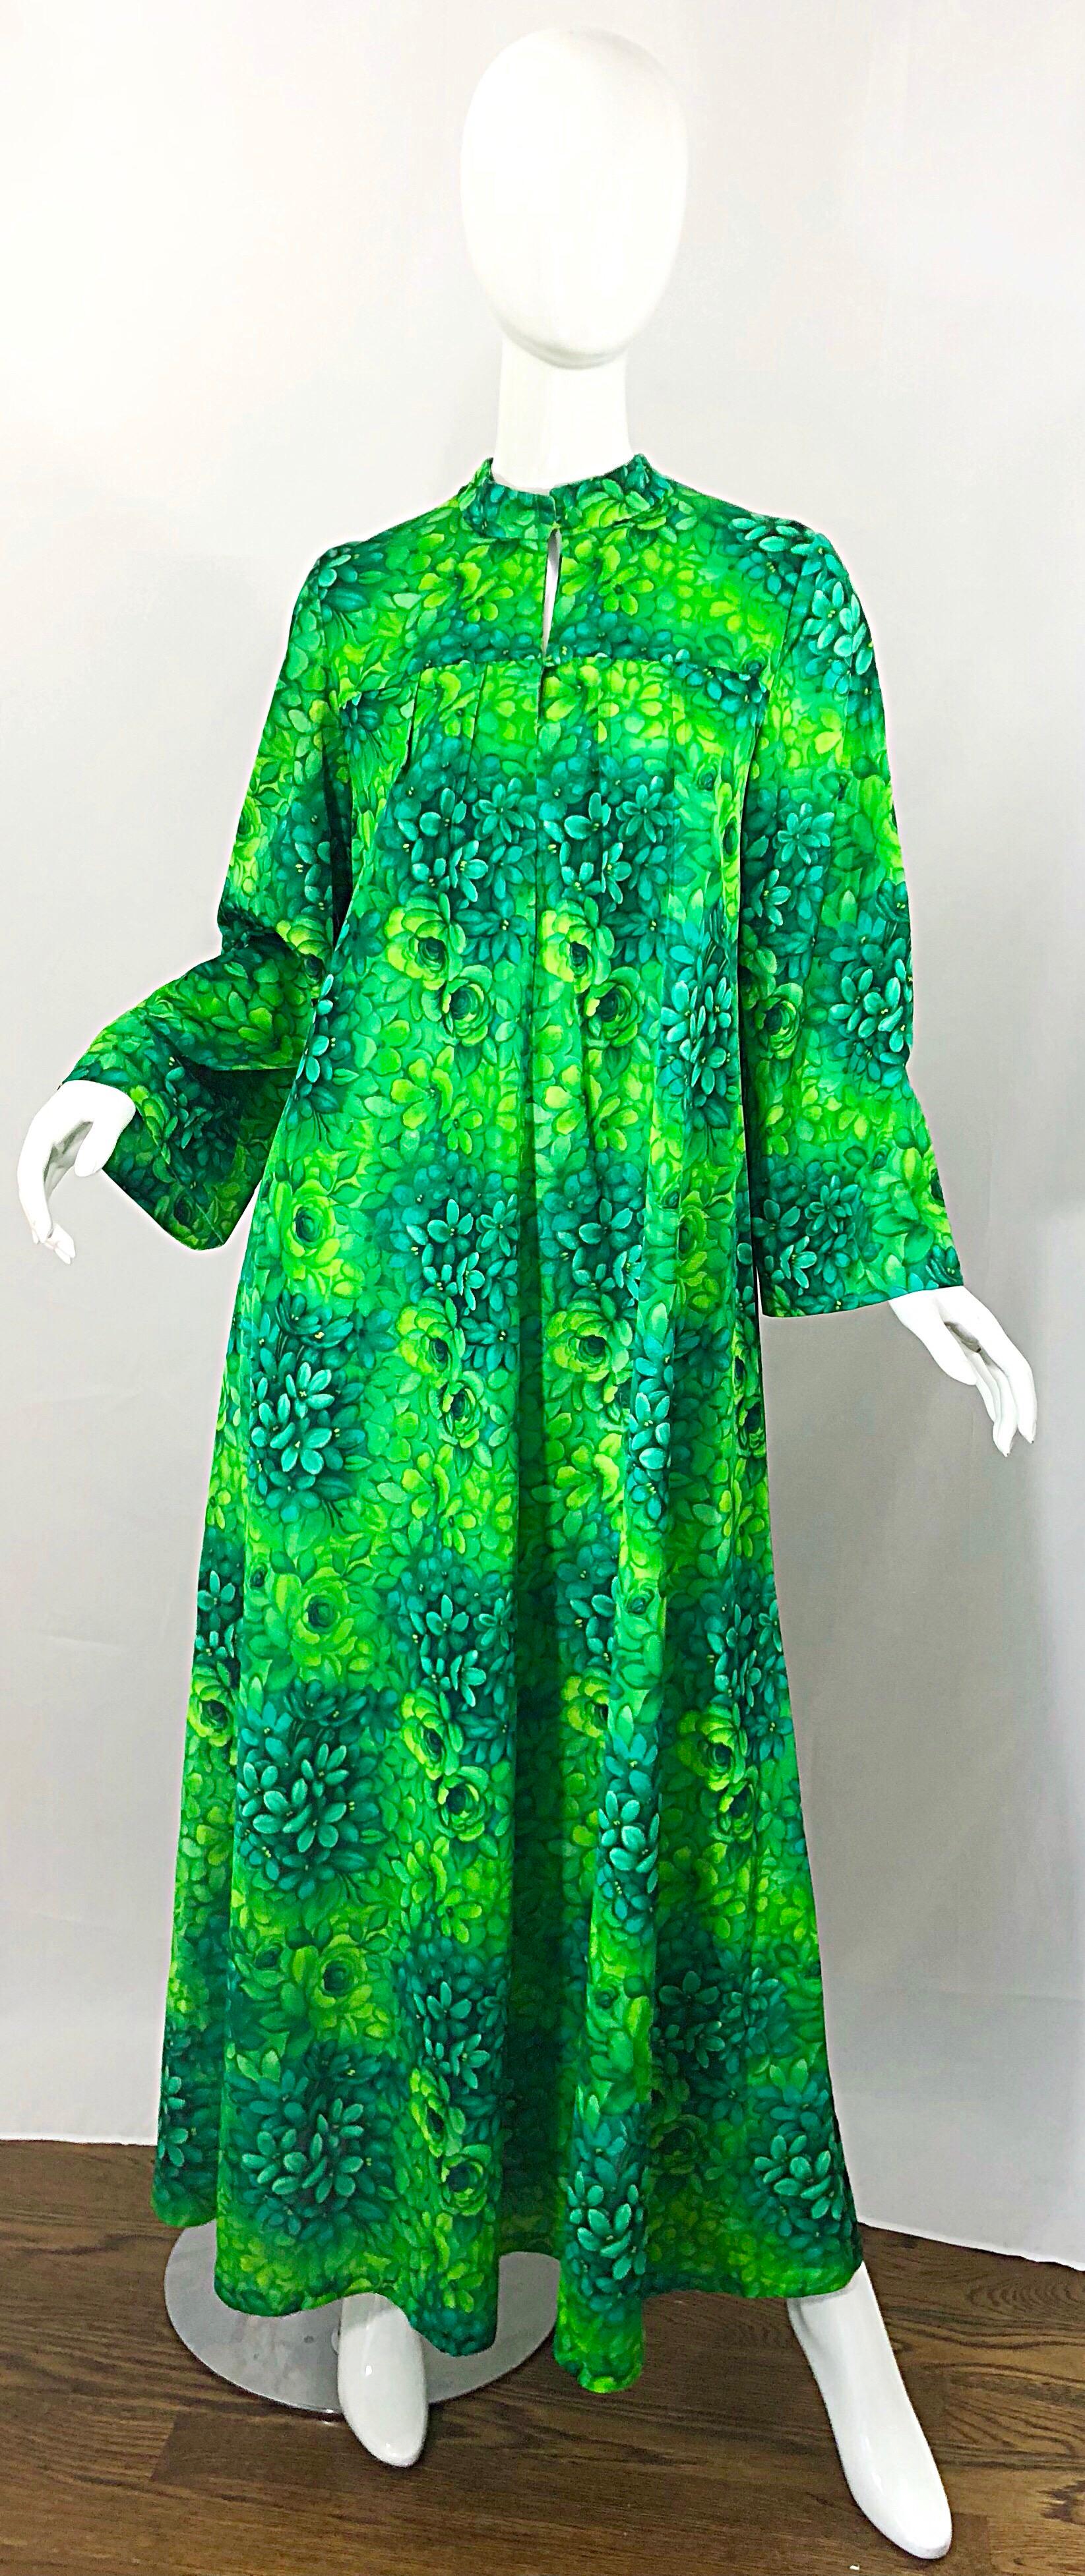 Amazing 1970s Neon + Kelly Green Abstract Flower Print 70s Vintage Caftan Dress 9